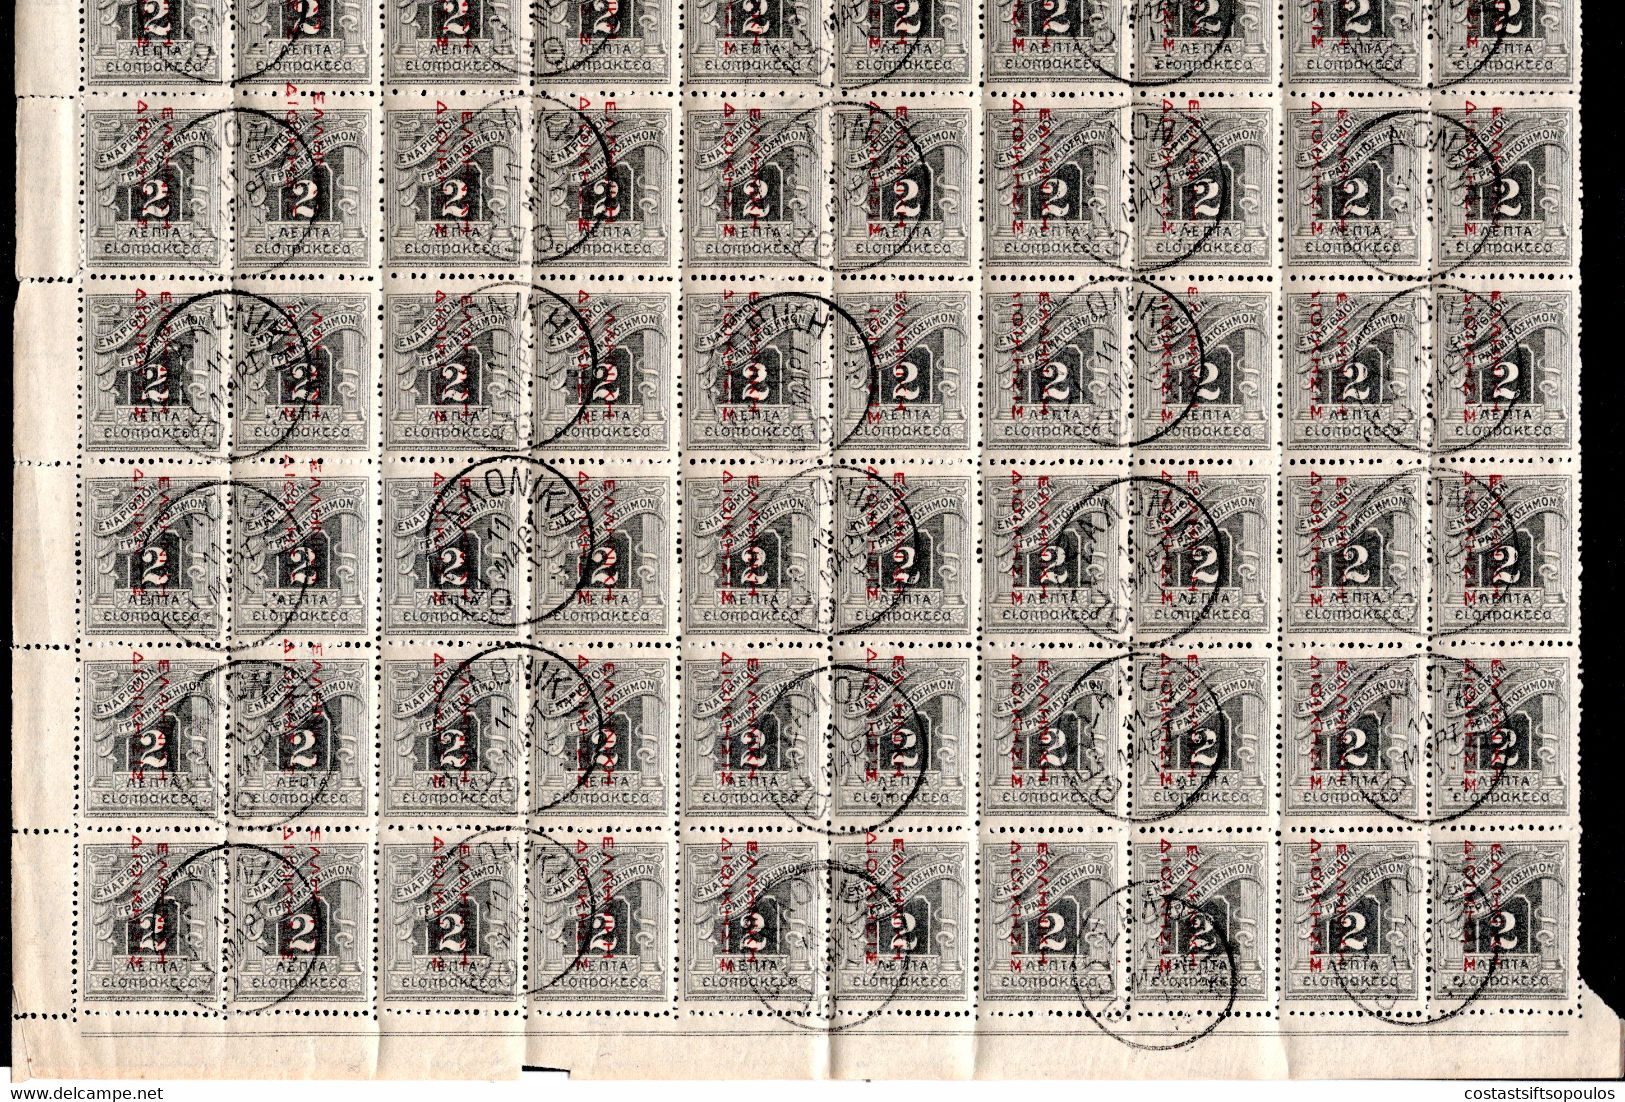 301.GREECE.1912 HELLAS D76 AND VARIETIES,HELLENIC ADM.2L.SHEET OF 100 C.T.O. SALONIQUE,CATALOGUE VALUE OVER EURO 1000 - Gebraucht